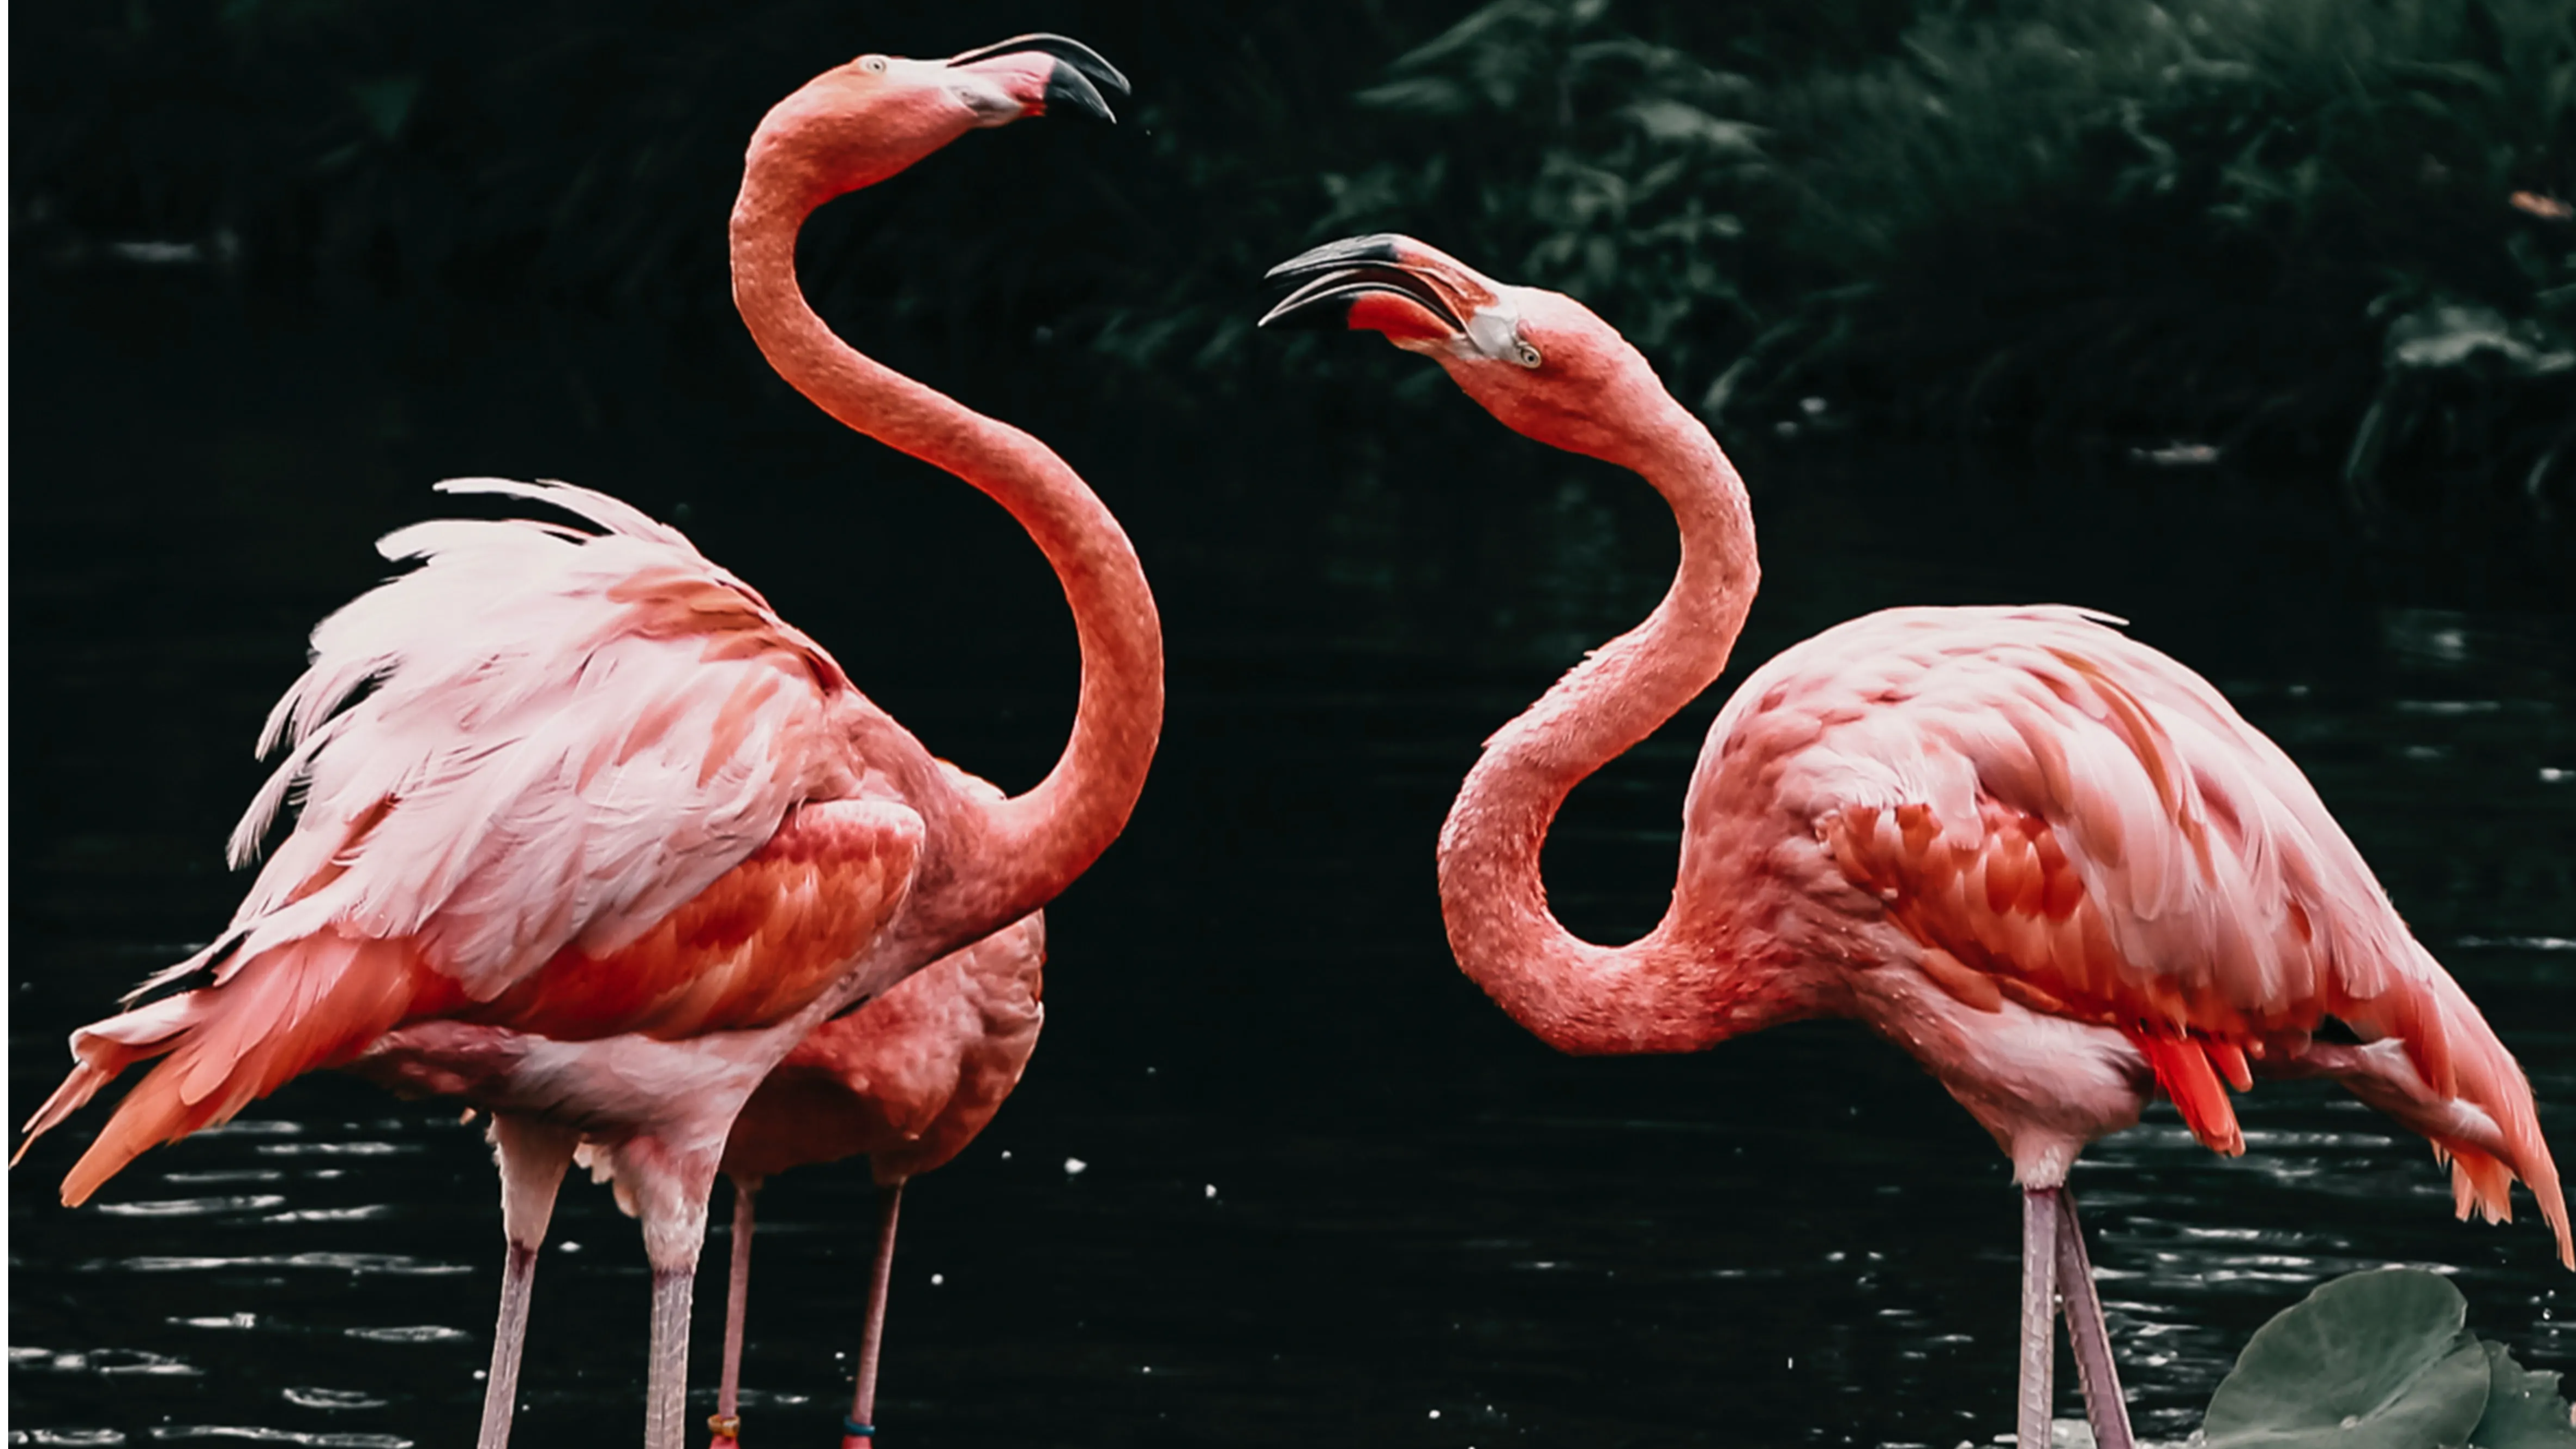 Australia brings back its last two flamingos to life, courtesy of taxidermy